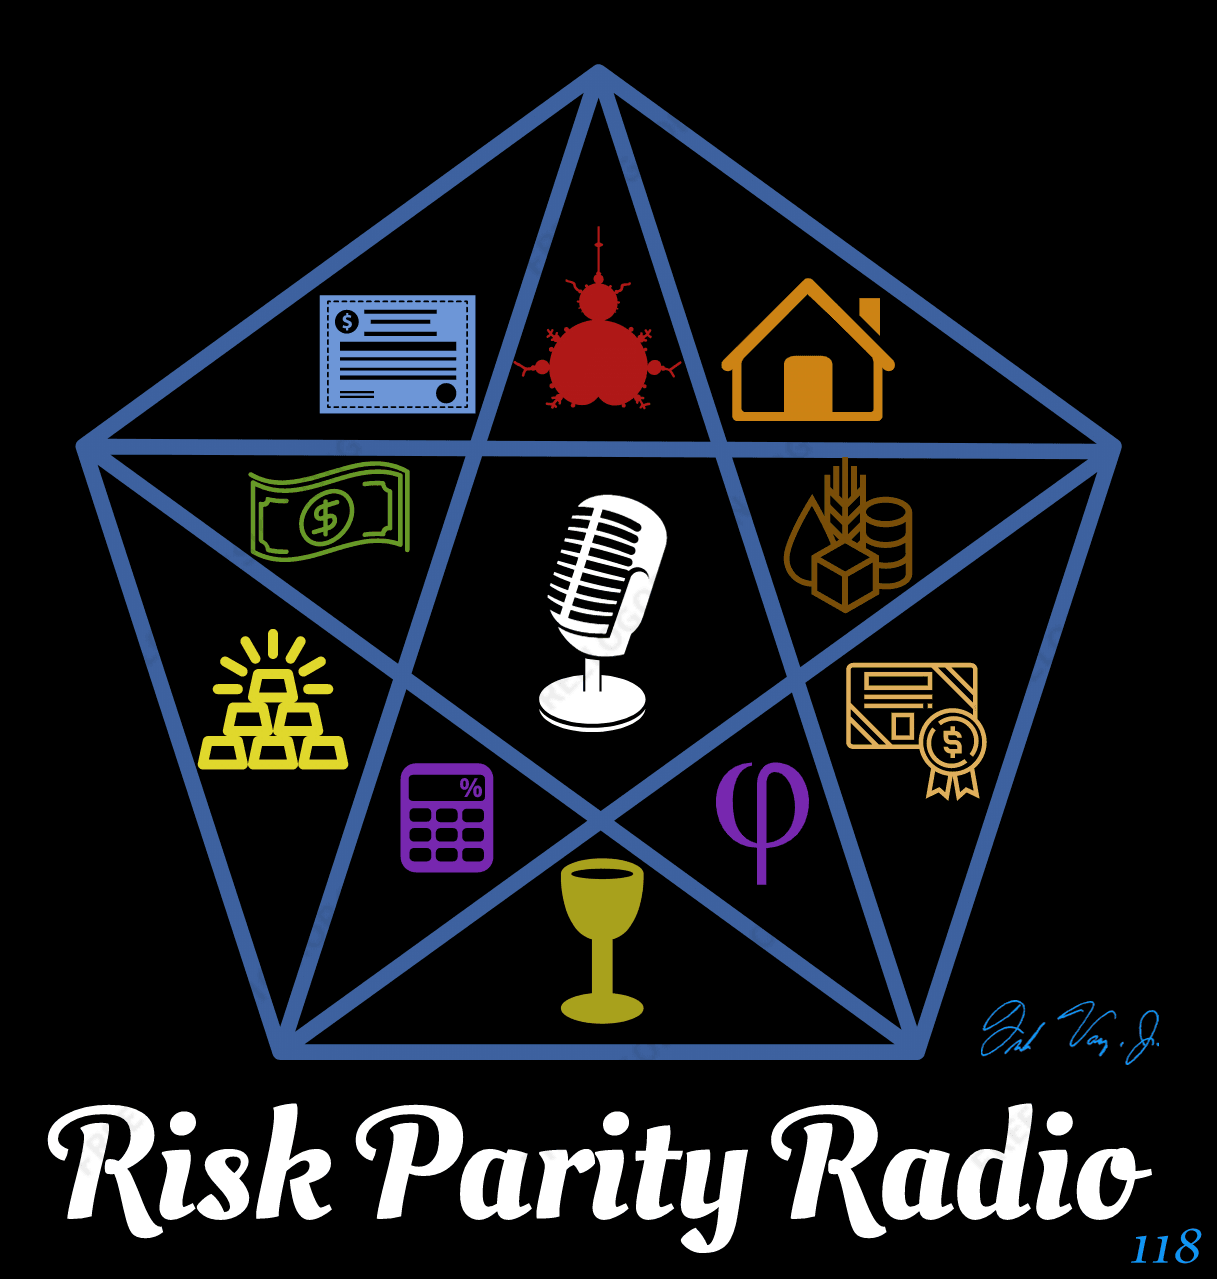 Limited Edition Risk Parity Radio Autographed Print #118